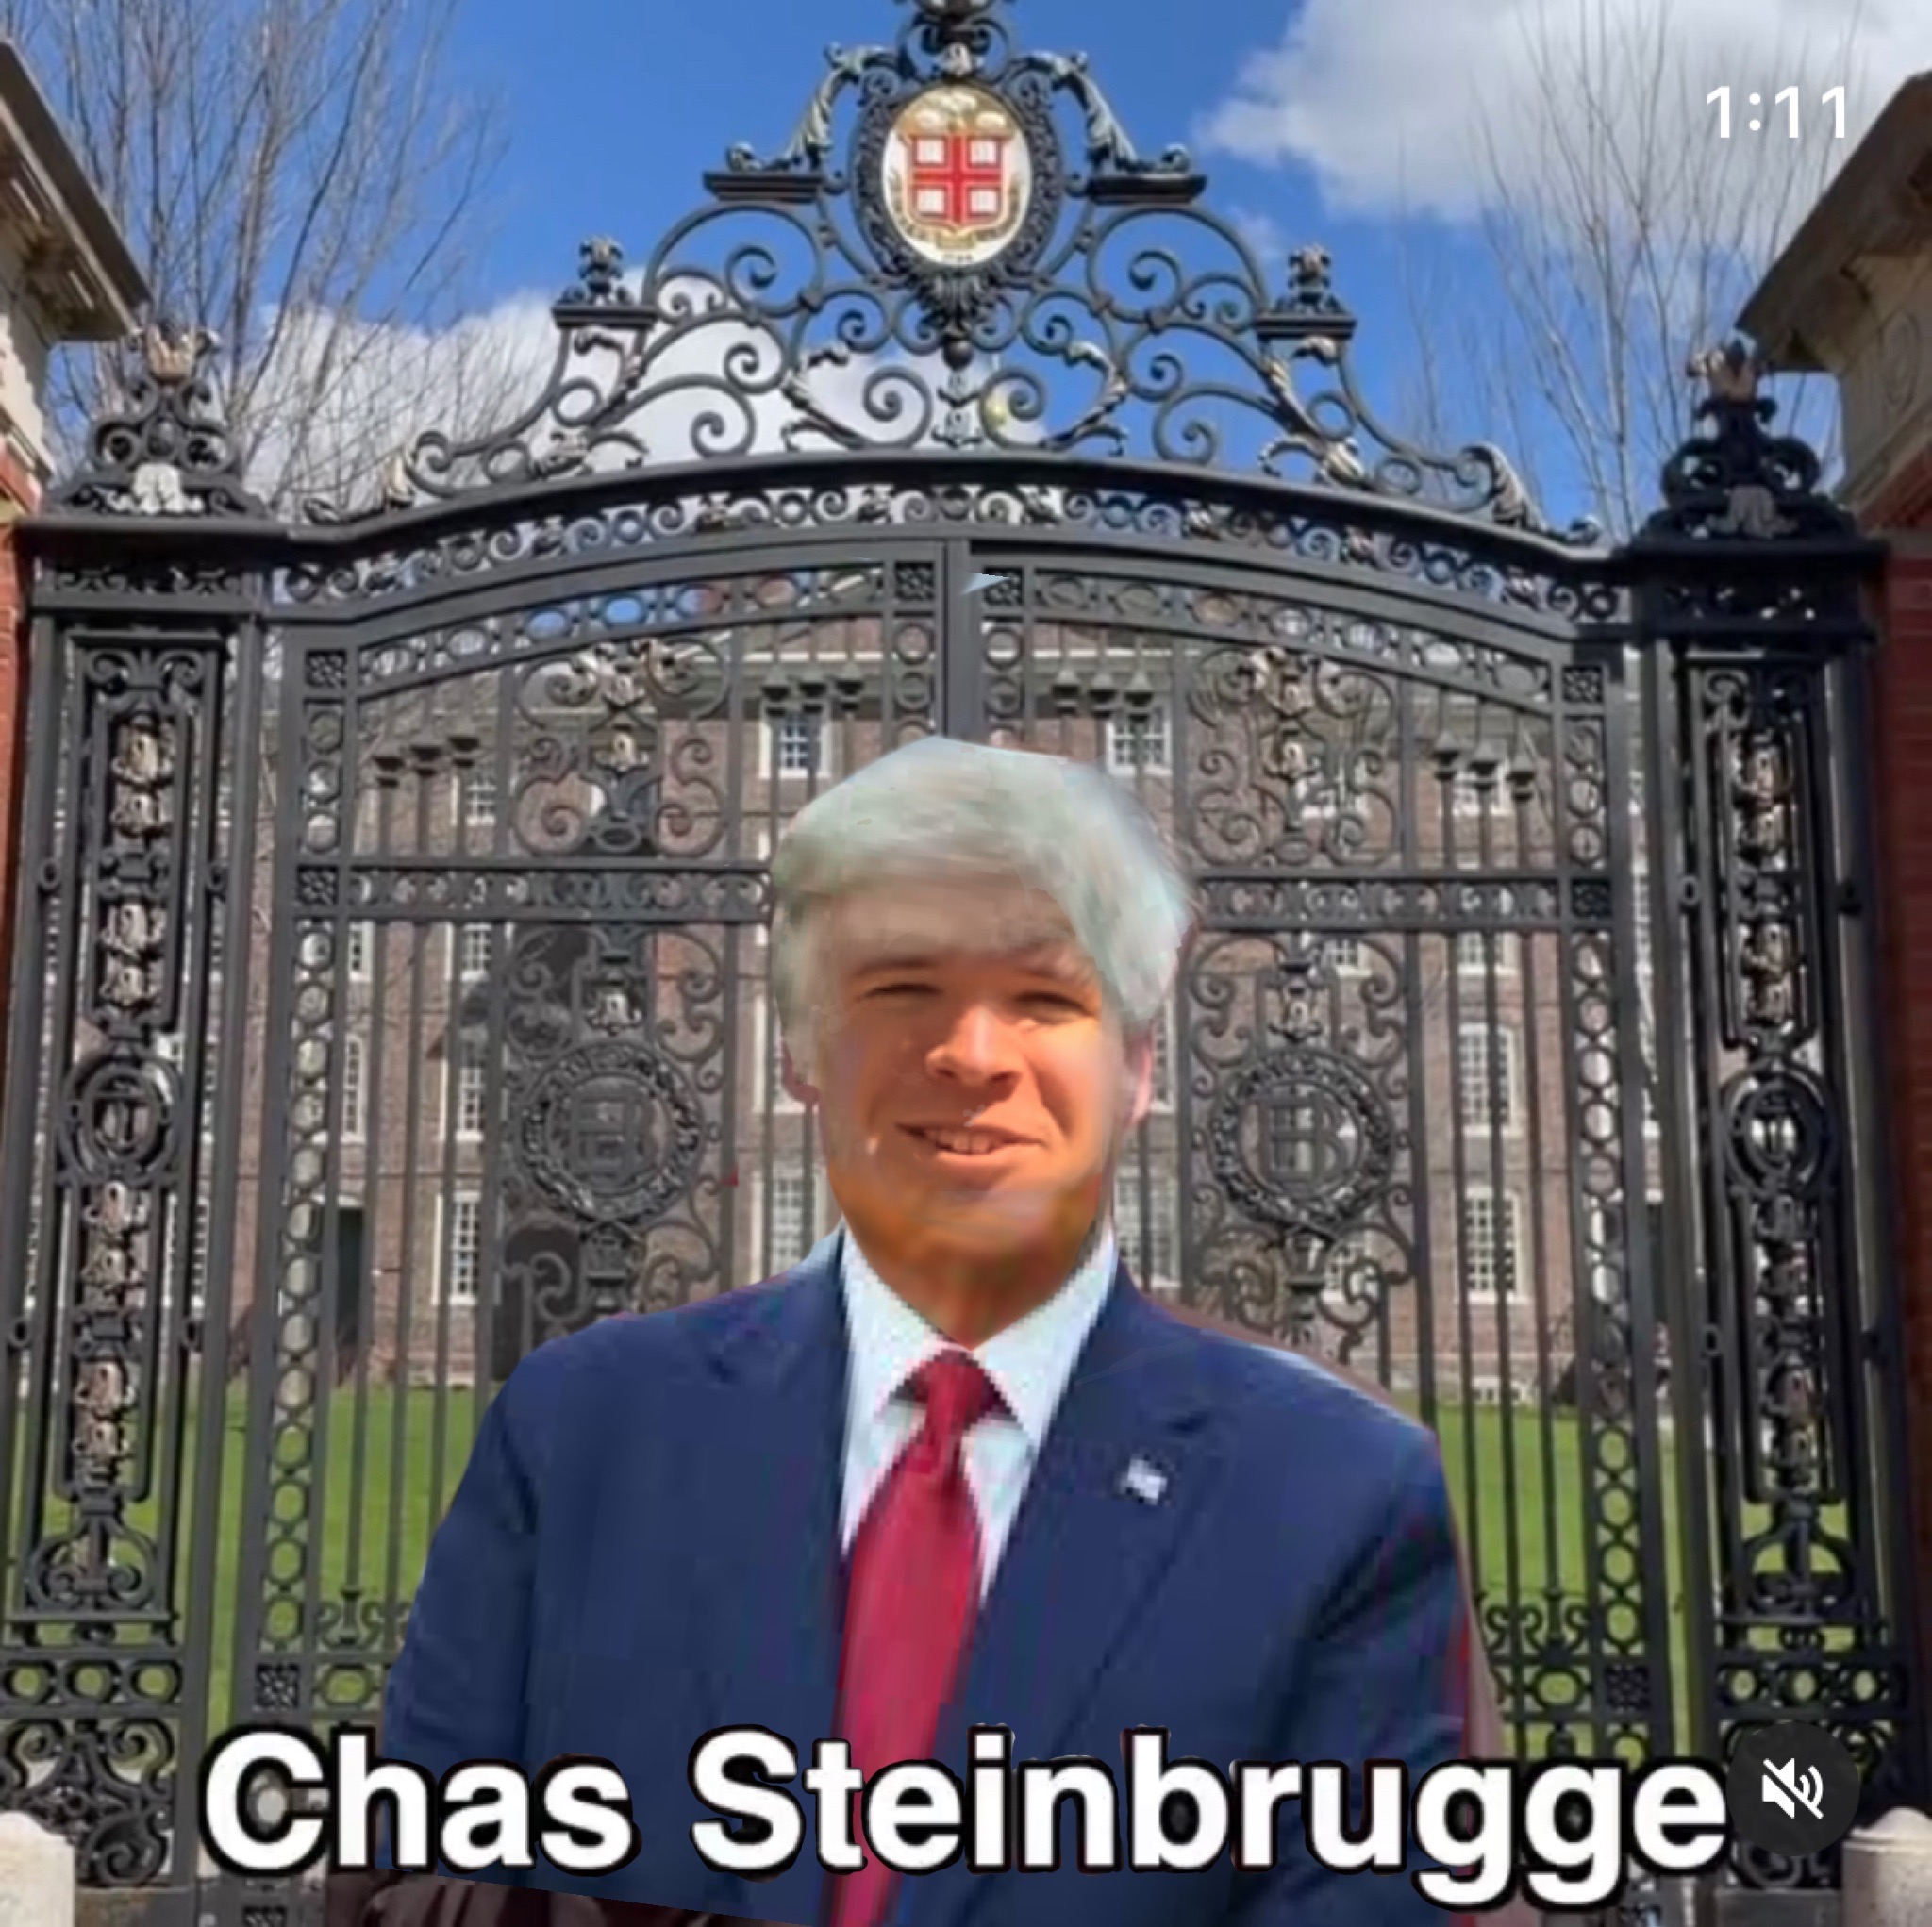 Populist Meme Overlord Trumps his Competition, Becomes UCS President